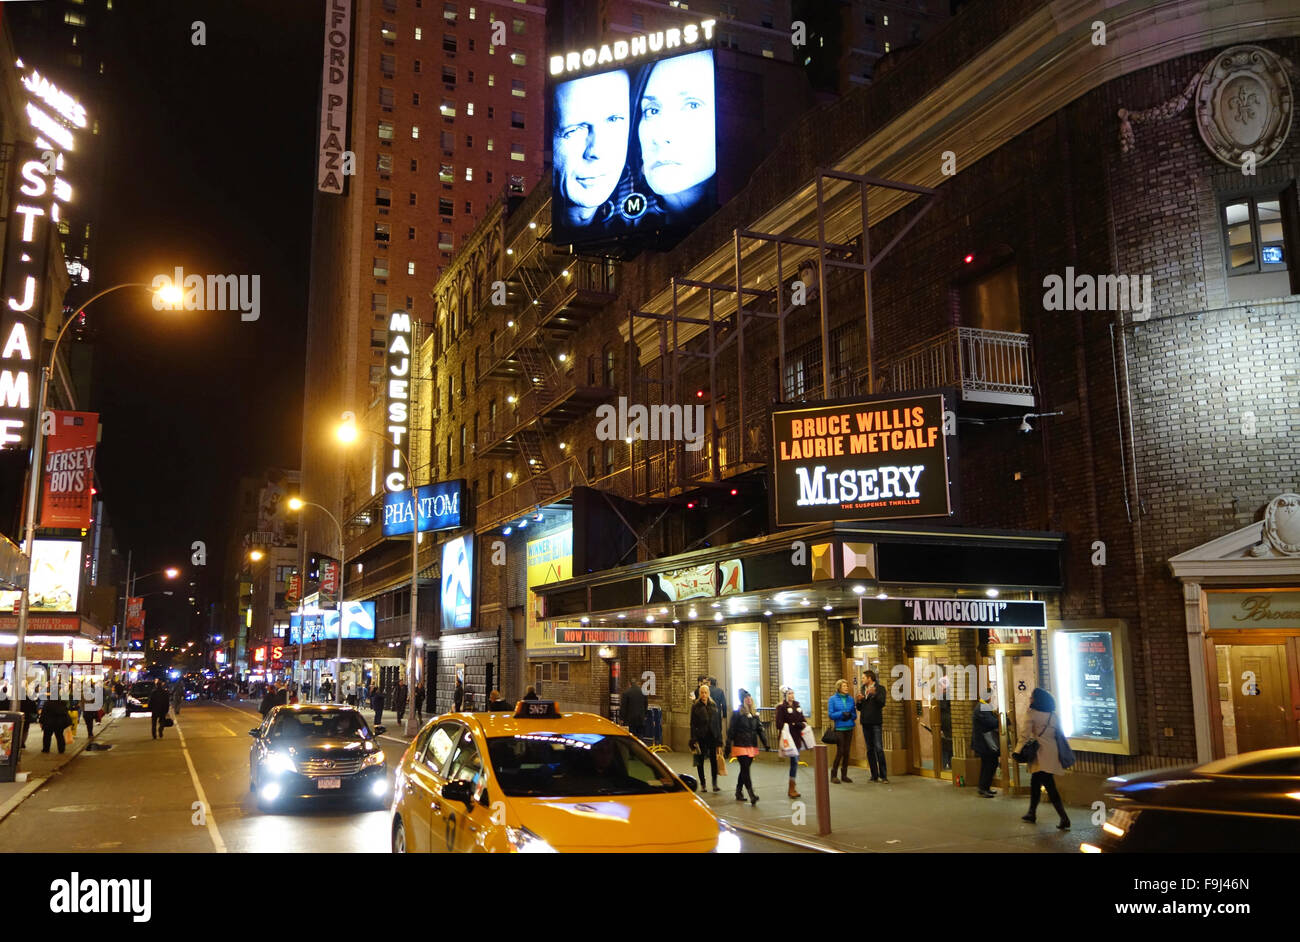 The Broadhurst Theatre on Broadway in New York, USA on the evening of 26 November 2015. Currently at the Broadhurst Theatre, action star Bruce Willis is appearing in a stage adaptation of the thriller Misery. The theatre industry in New York has been booming in recent years. One reason for this has been the numerous guest appearances by Hollywood stars. PHOTO: CHRISTIAN FAHRENBACH/DPA Stock Photo